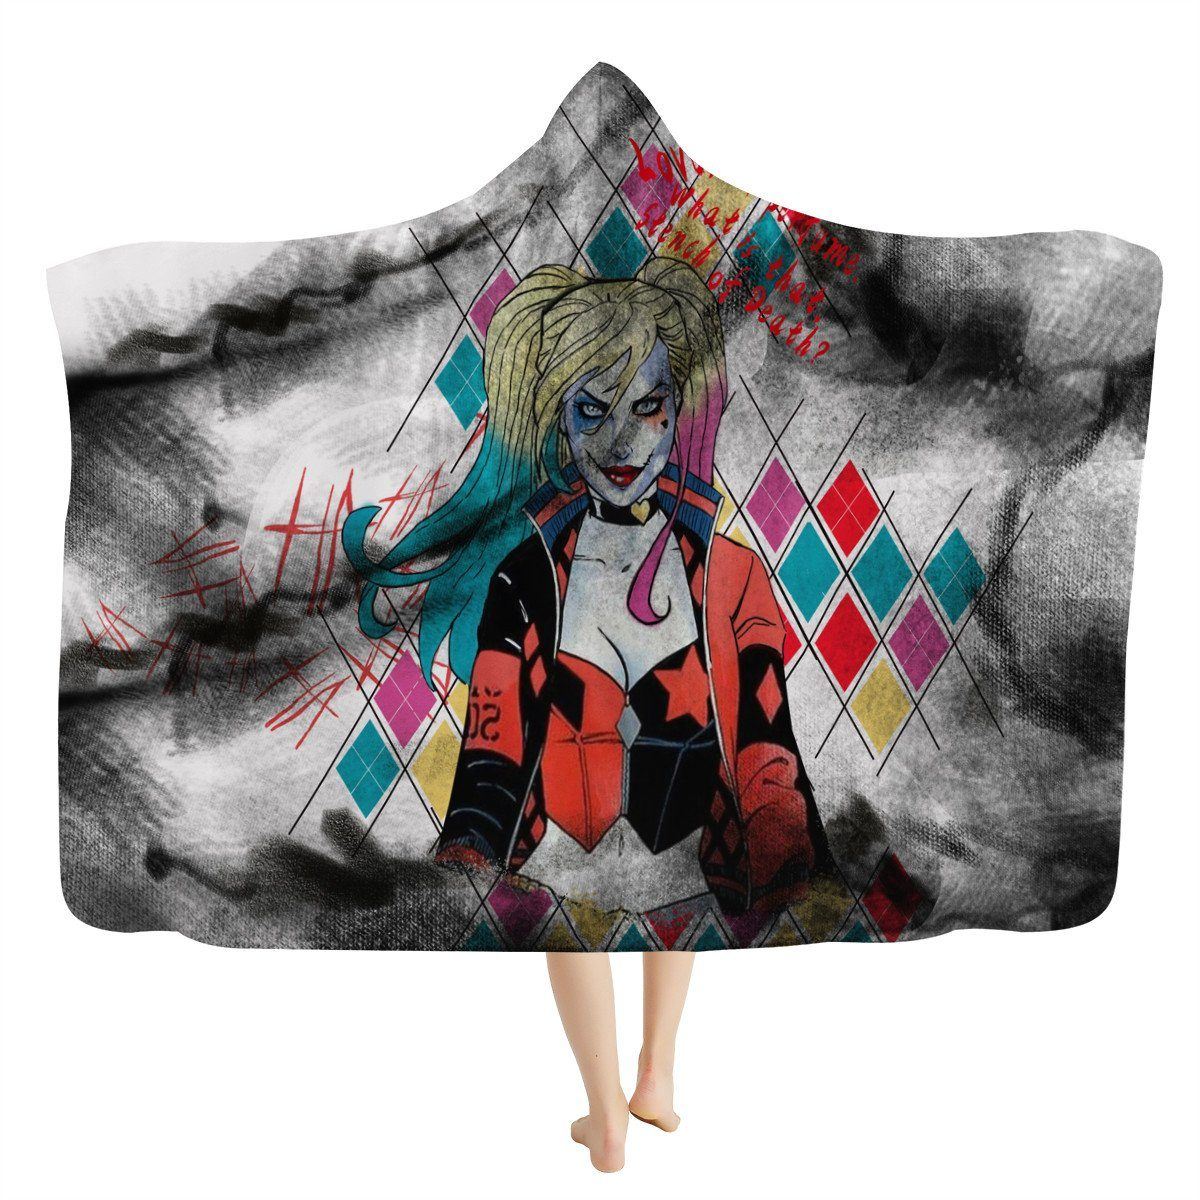 Suicide Squad Hooded Blanket Hooded Blanket, Suicide Squad noxfan Kids (45"T x 60"W) 